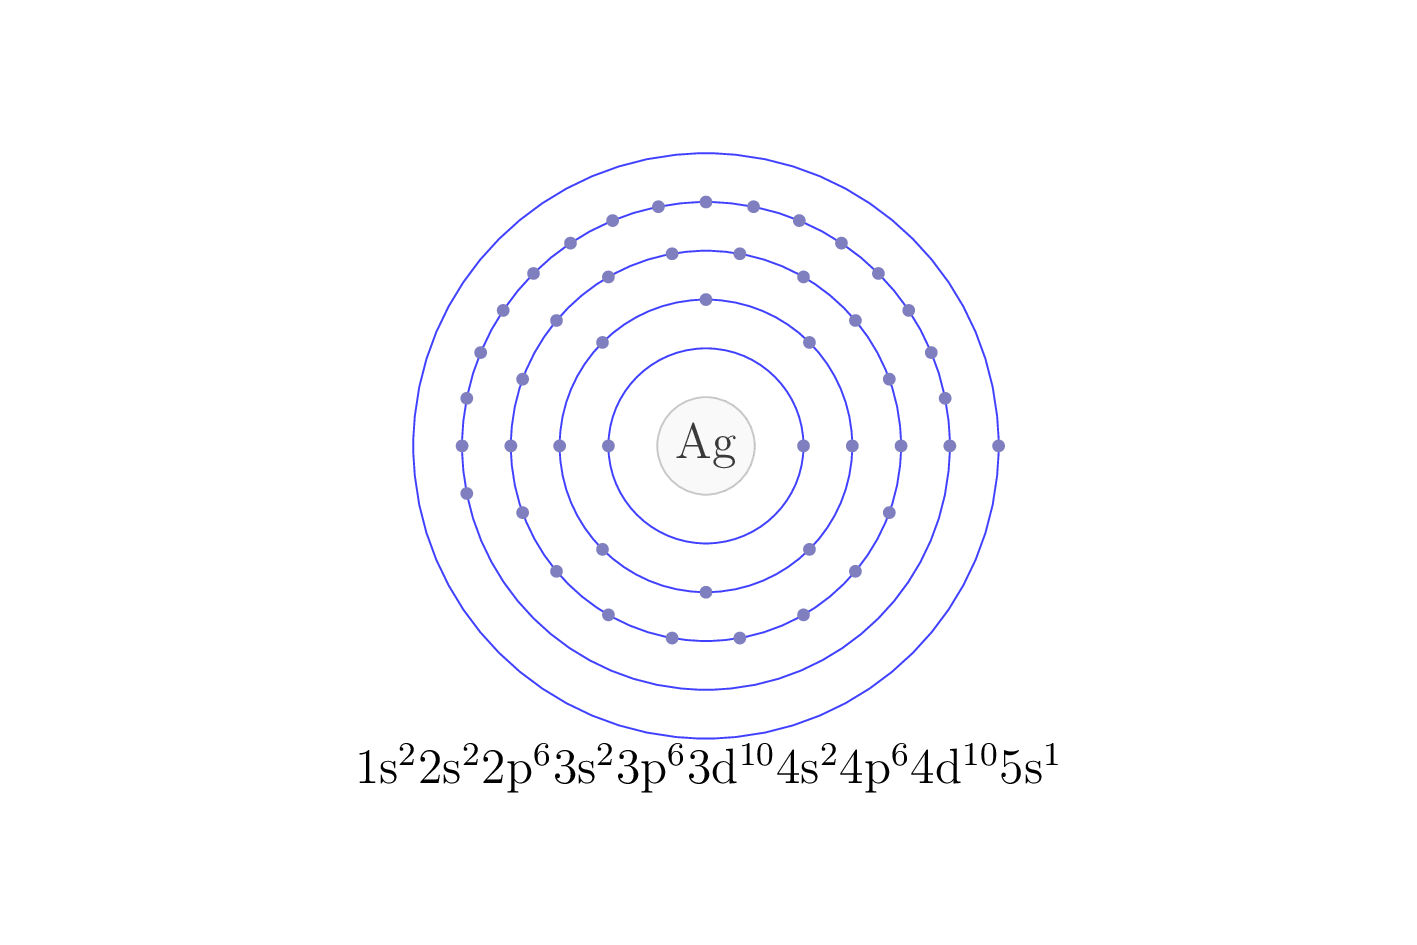 electron configuration of element Ag